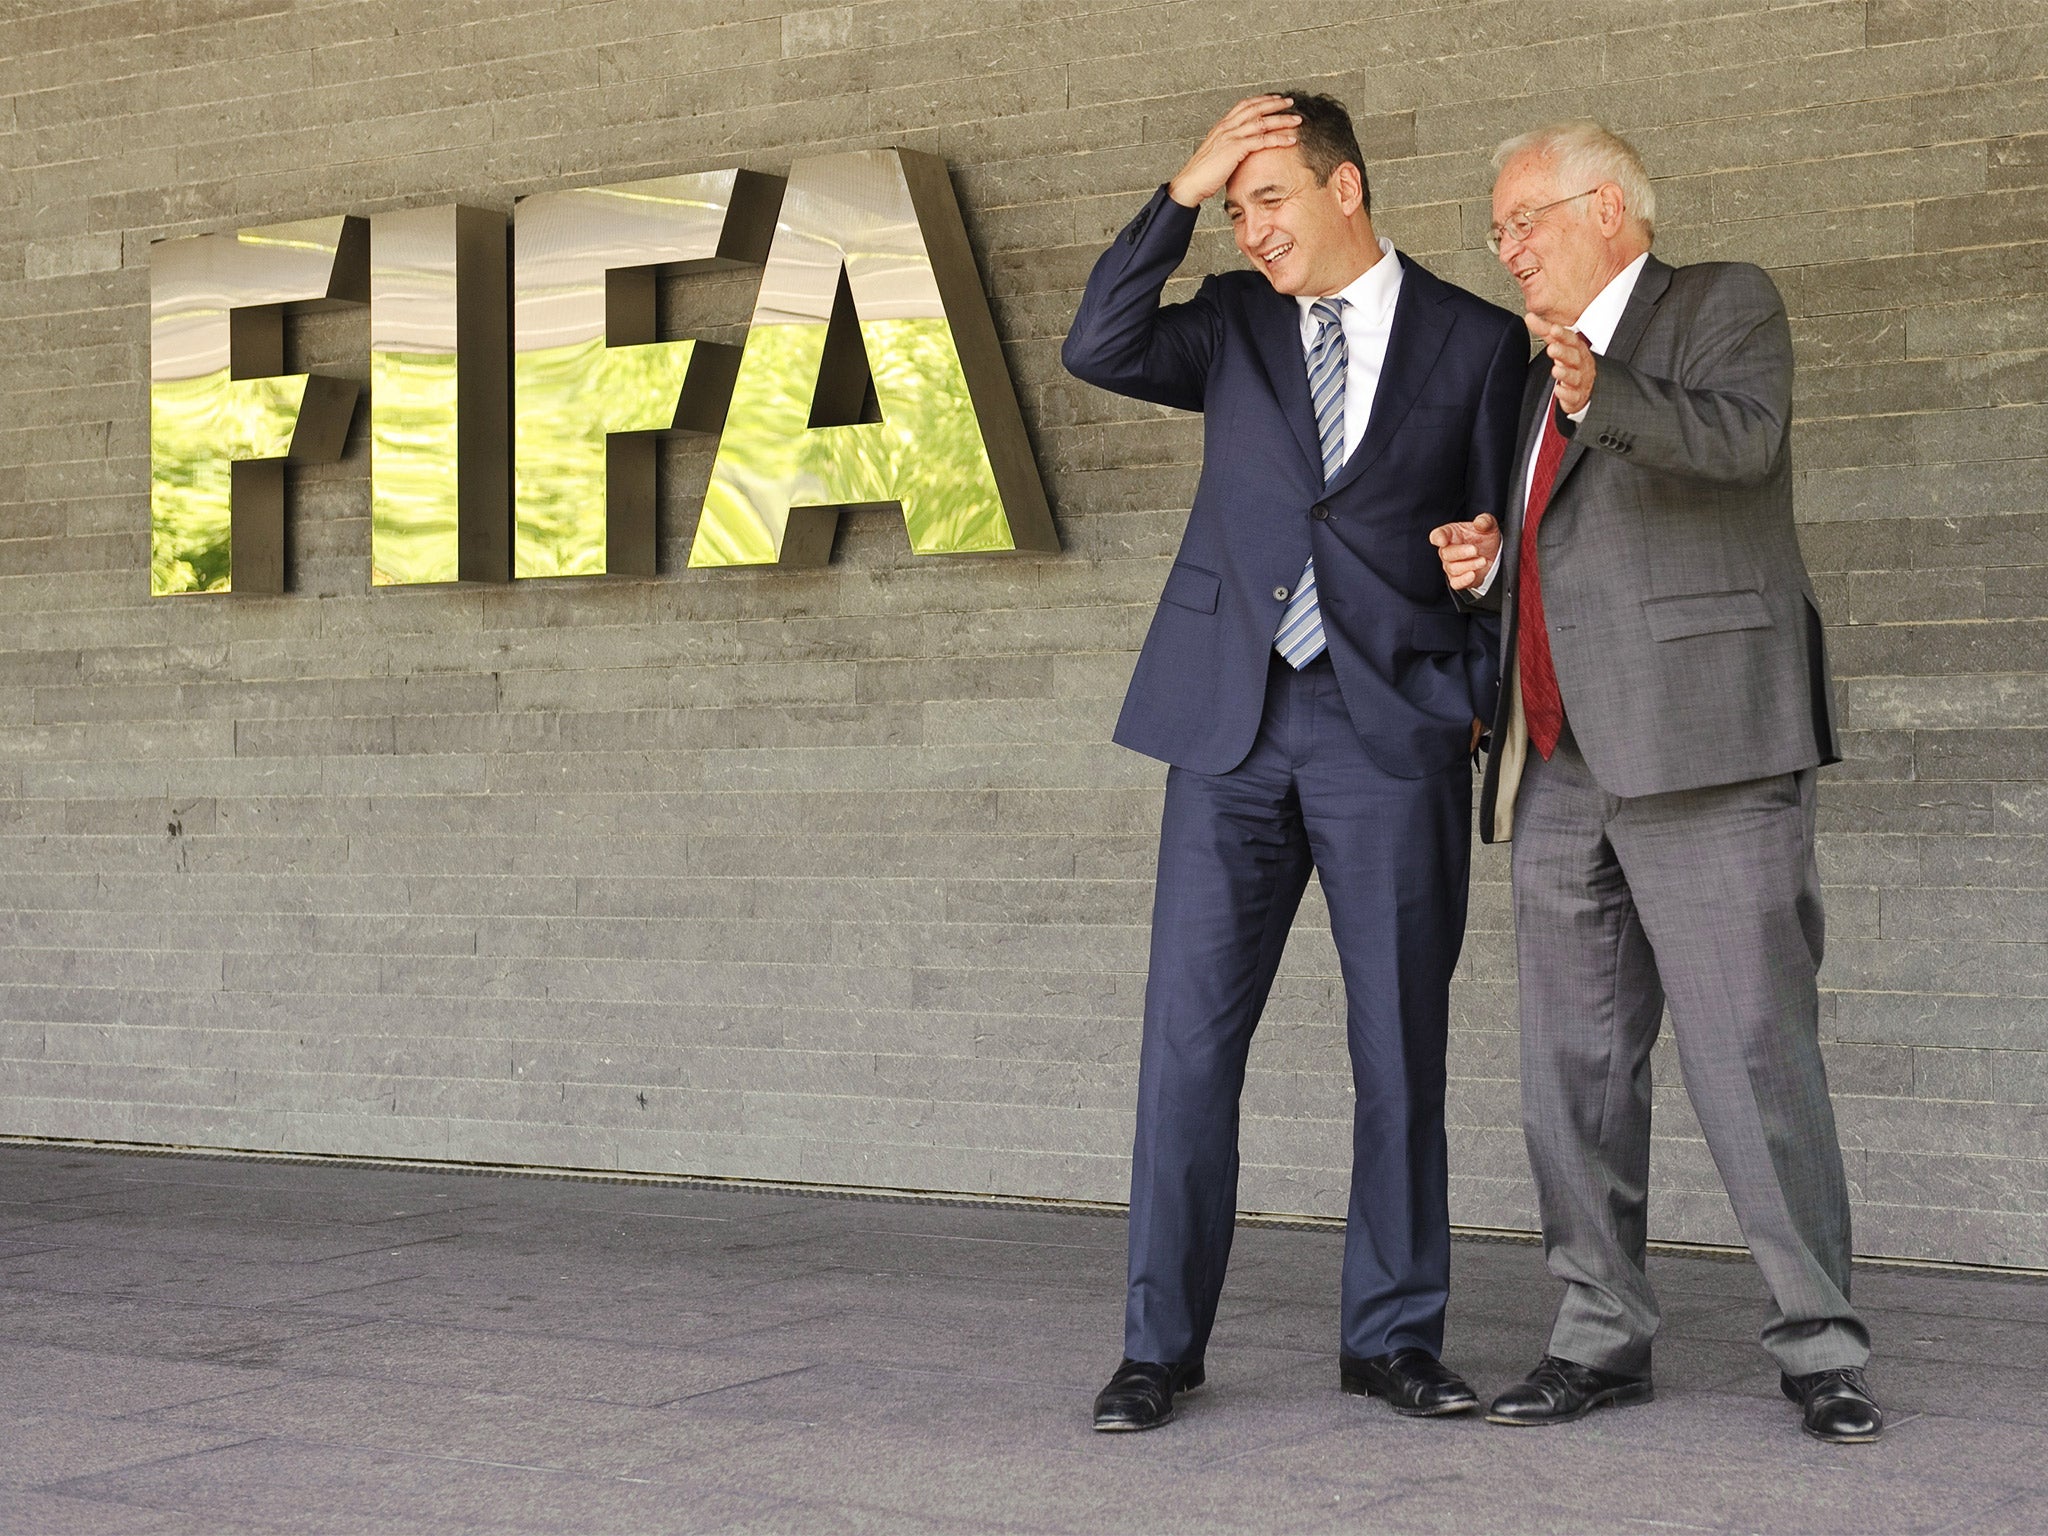 Michael Garcia (left), the former Fifa investigator, and Hans-Joachim Eckert (right), who summarised his report, outside Fifa headquarters in 2012